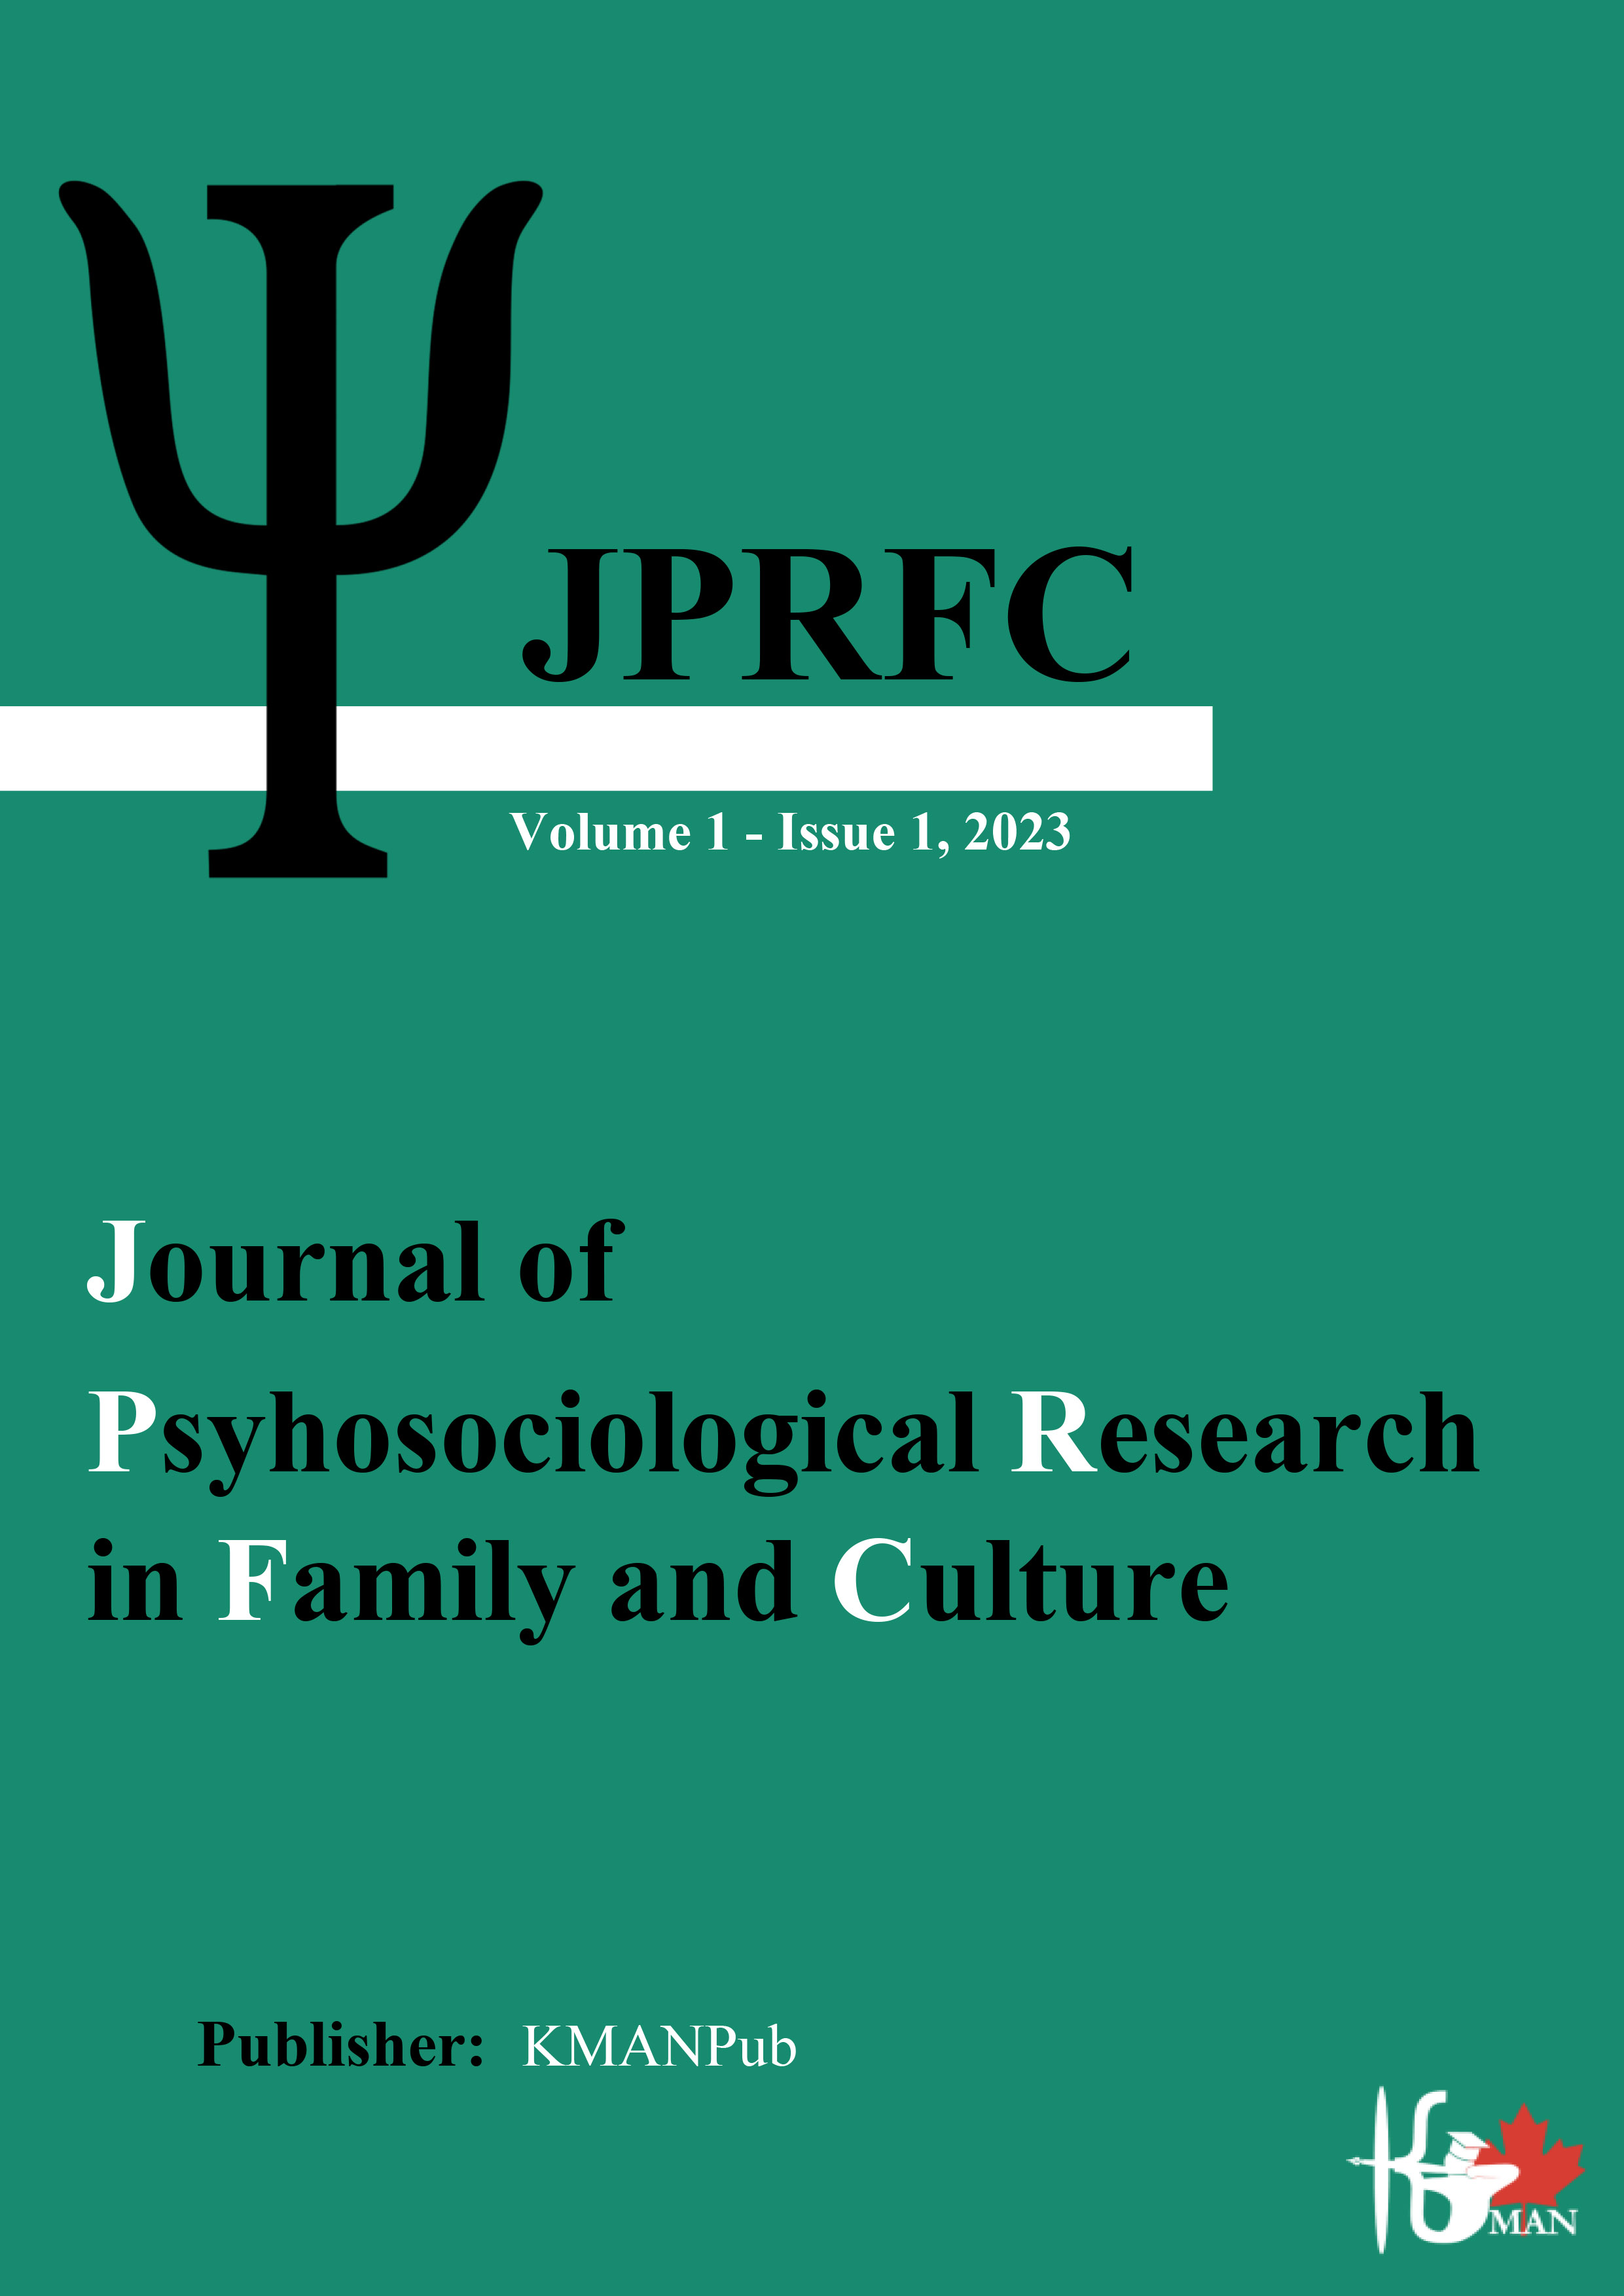 Journal of Psyhosociological Research in Family and Culture